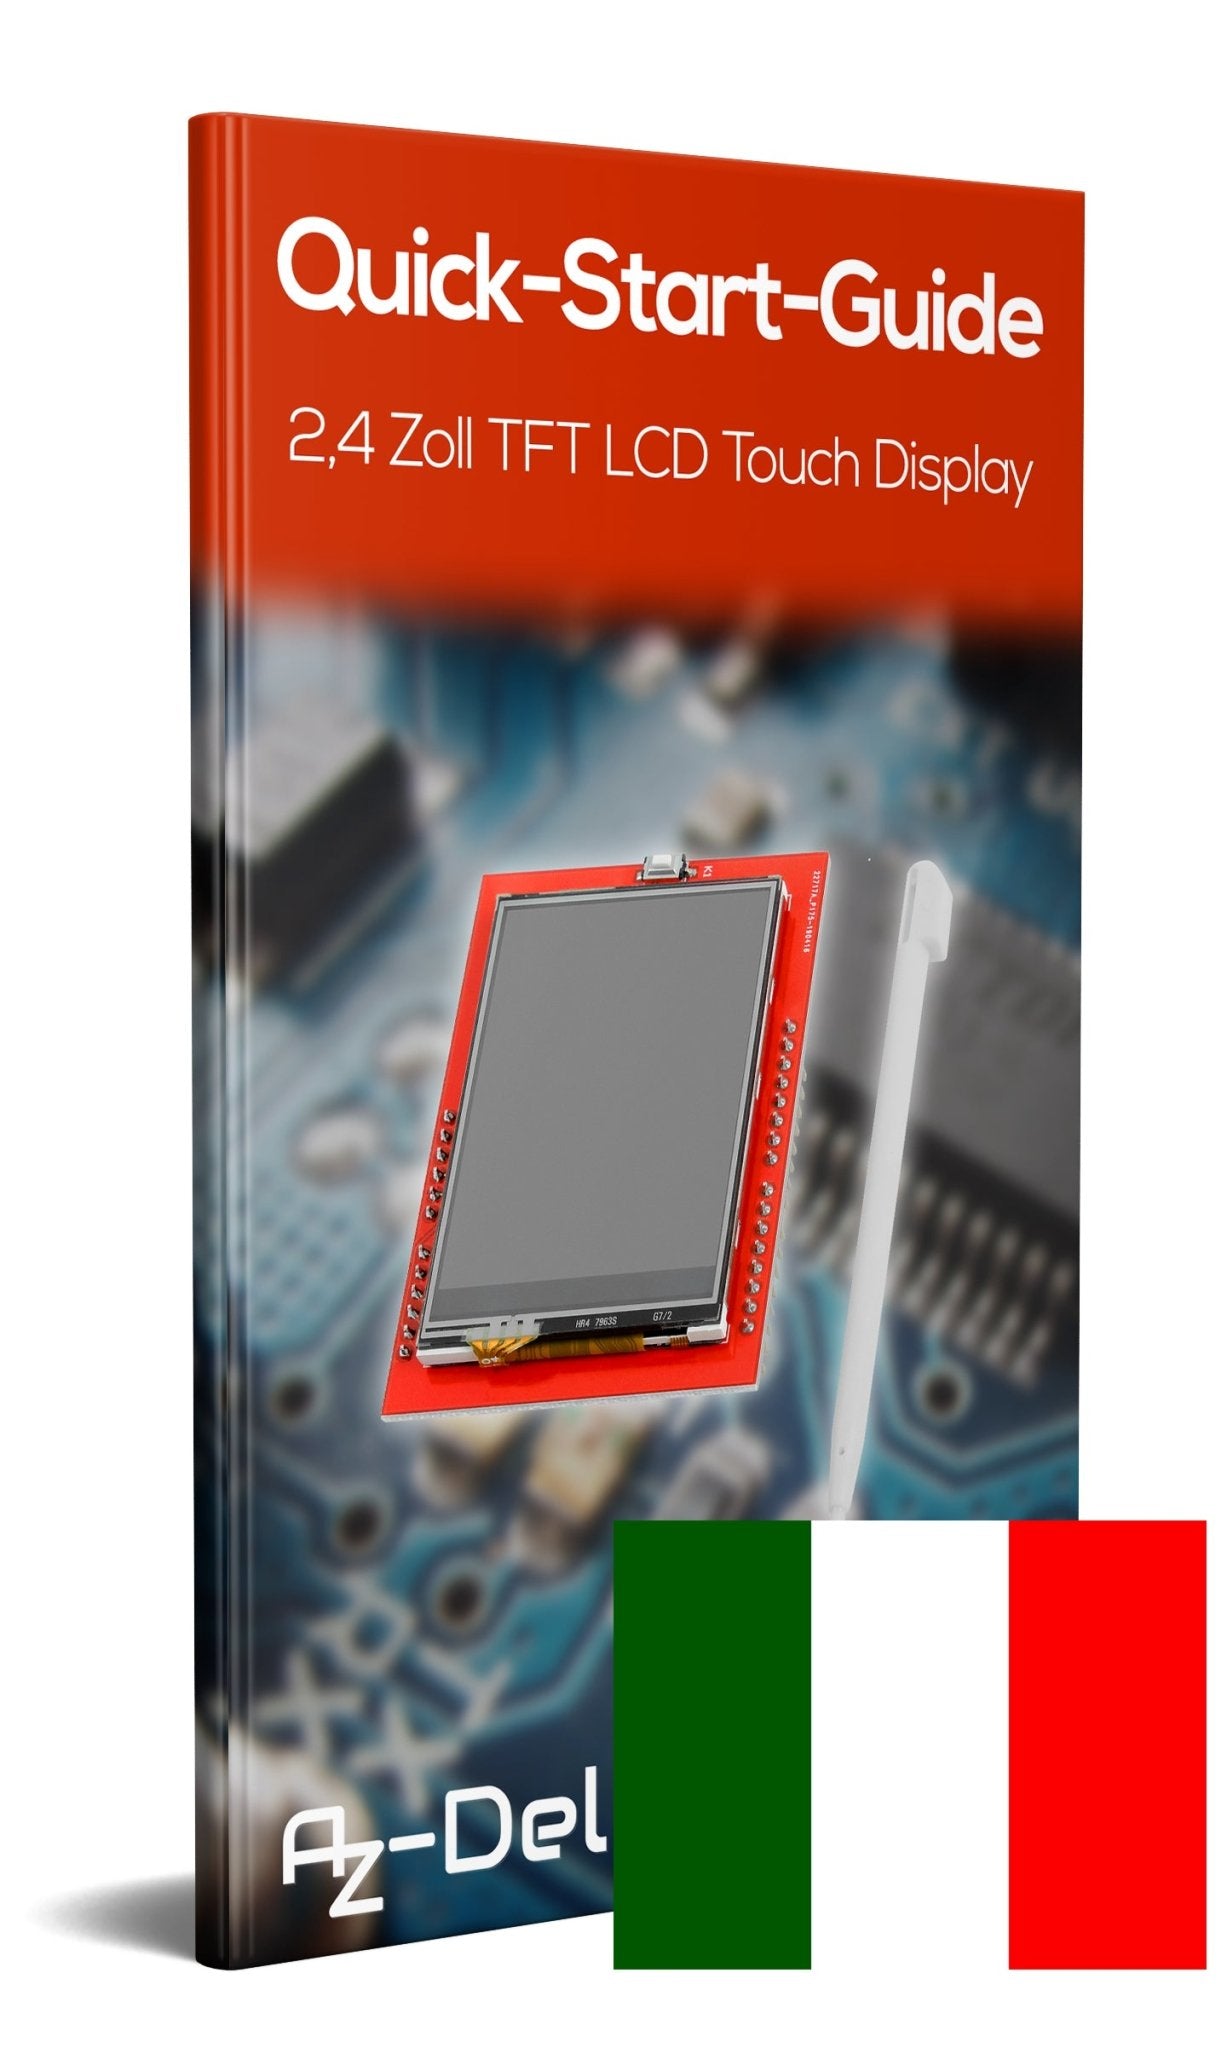 2,4 Zoll TFT LCD Touch Display